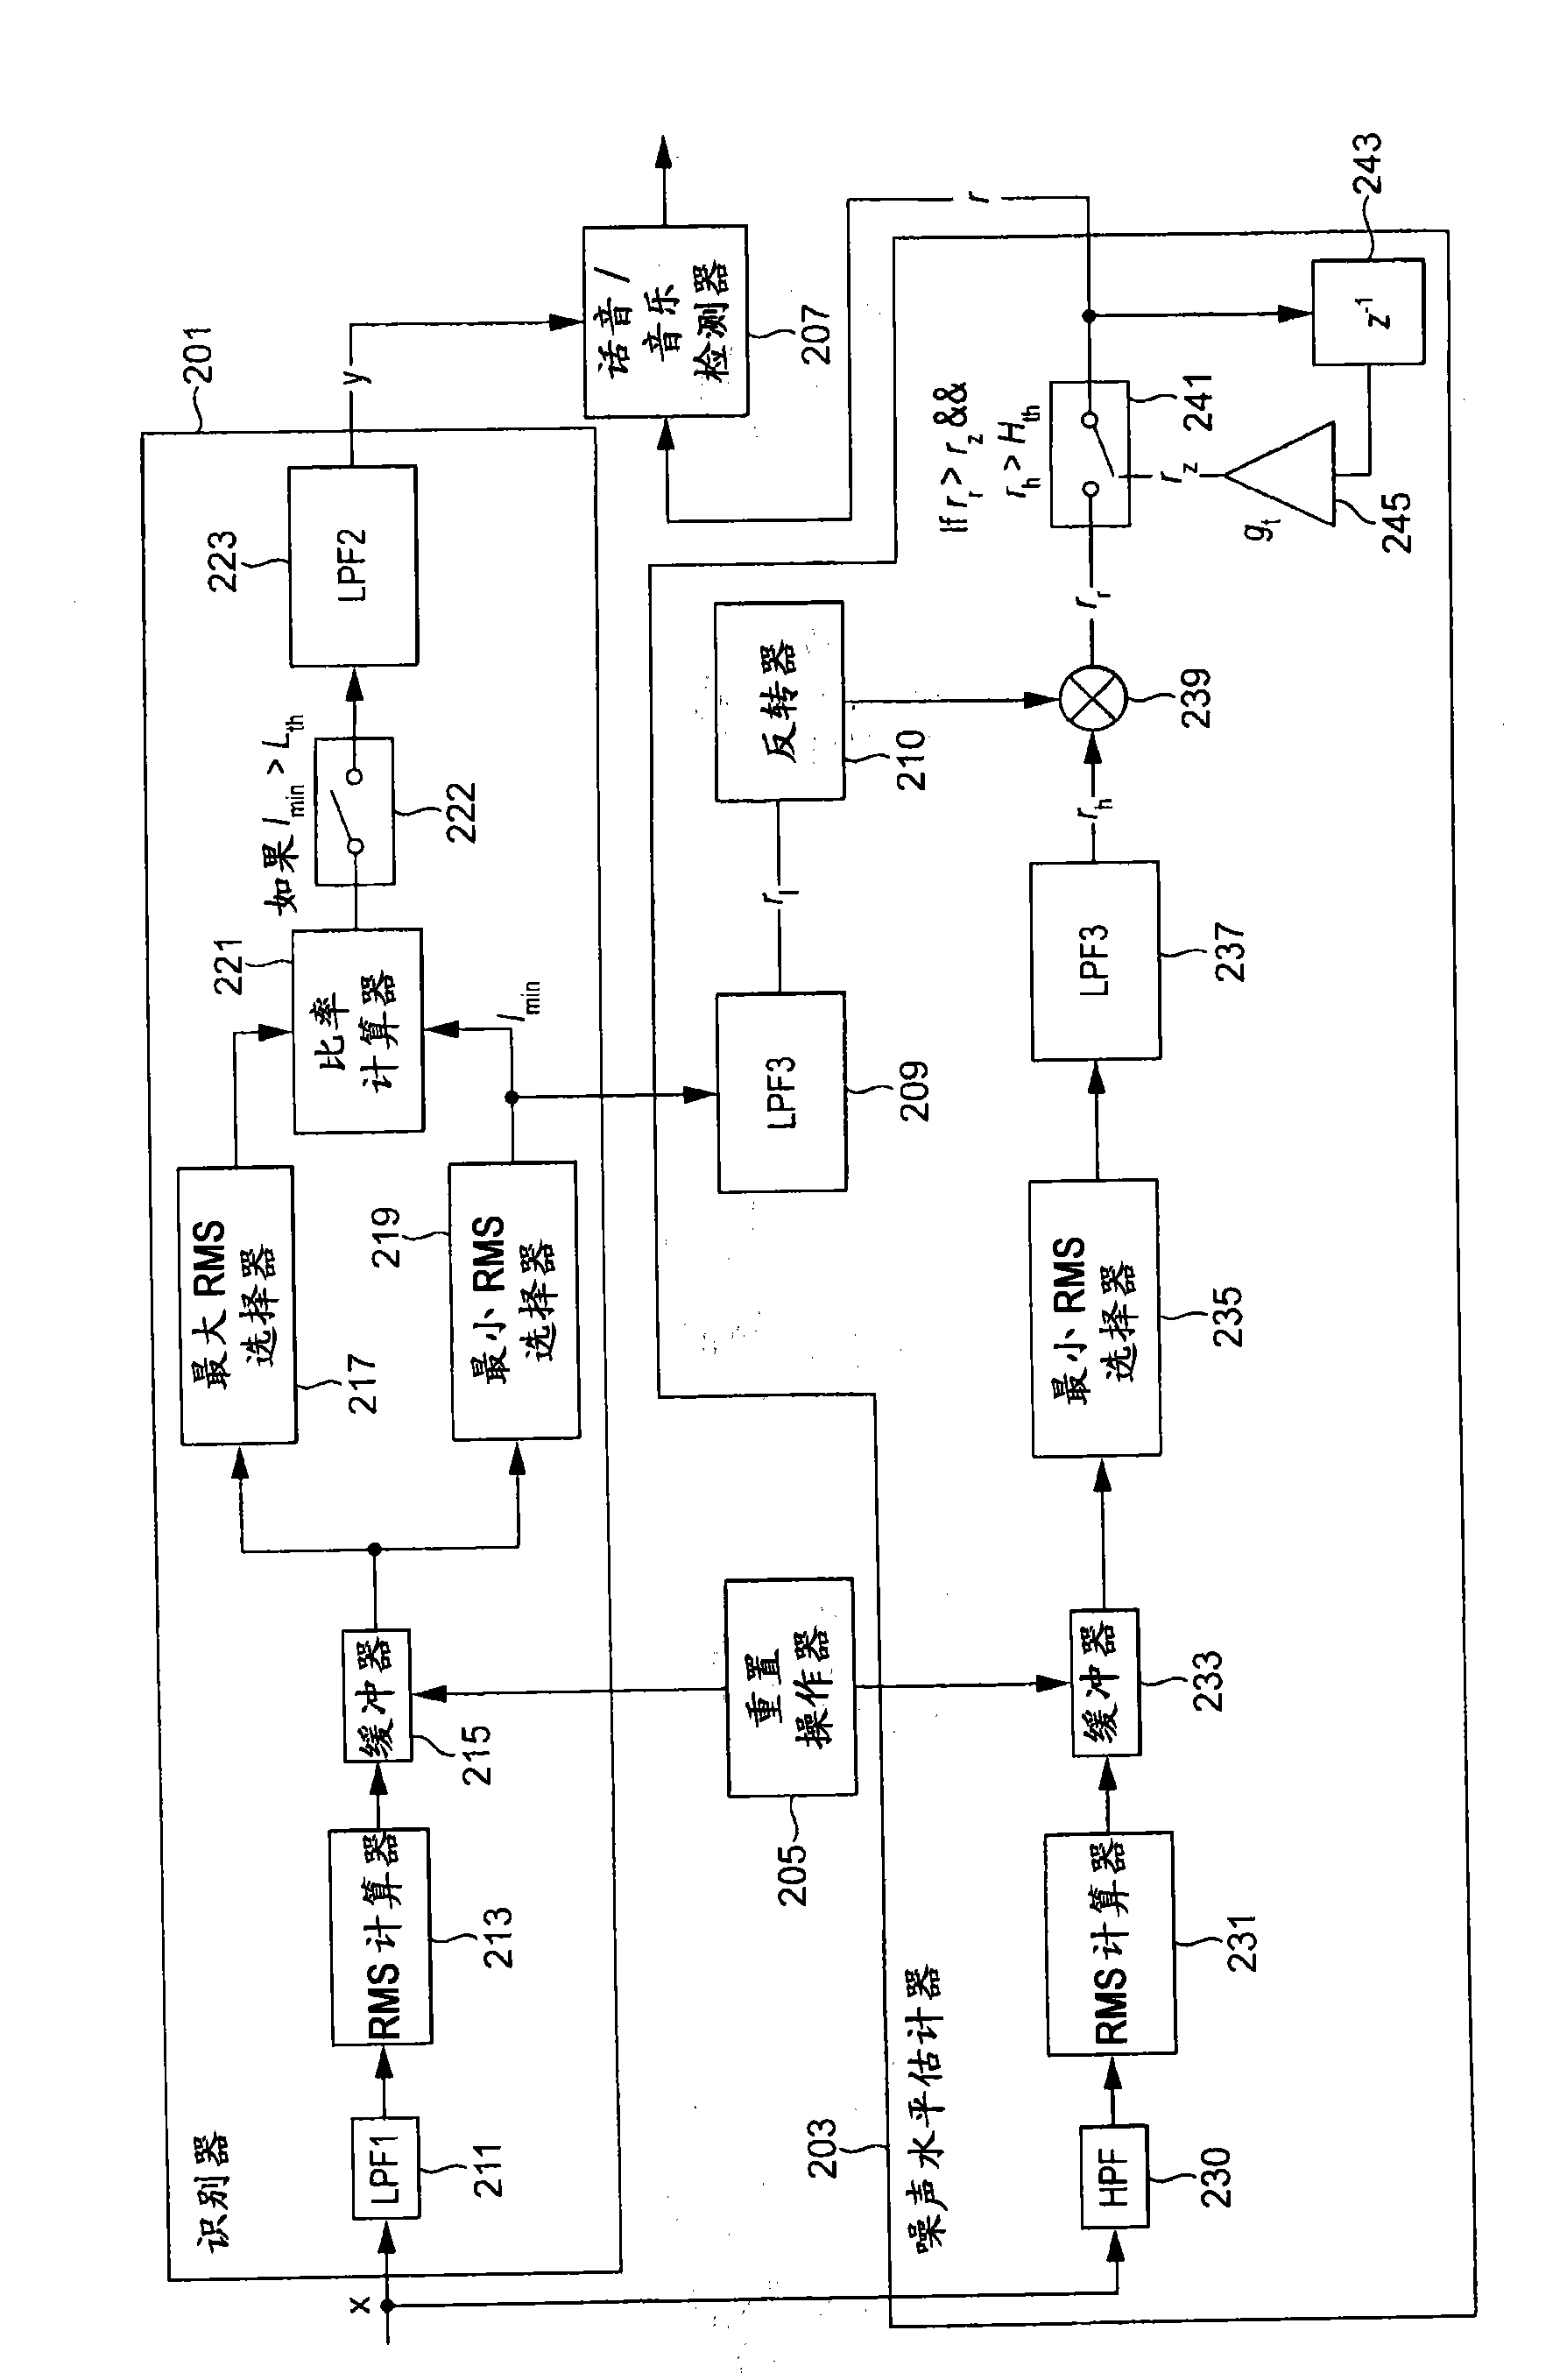 Method and apparatus for audio signal classification